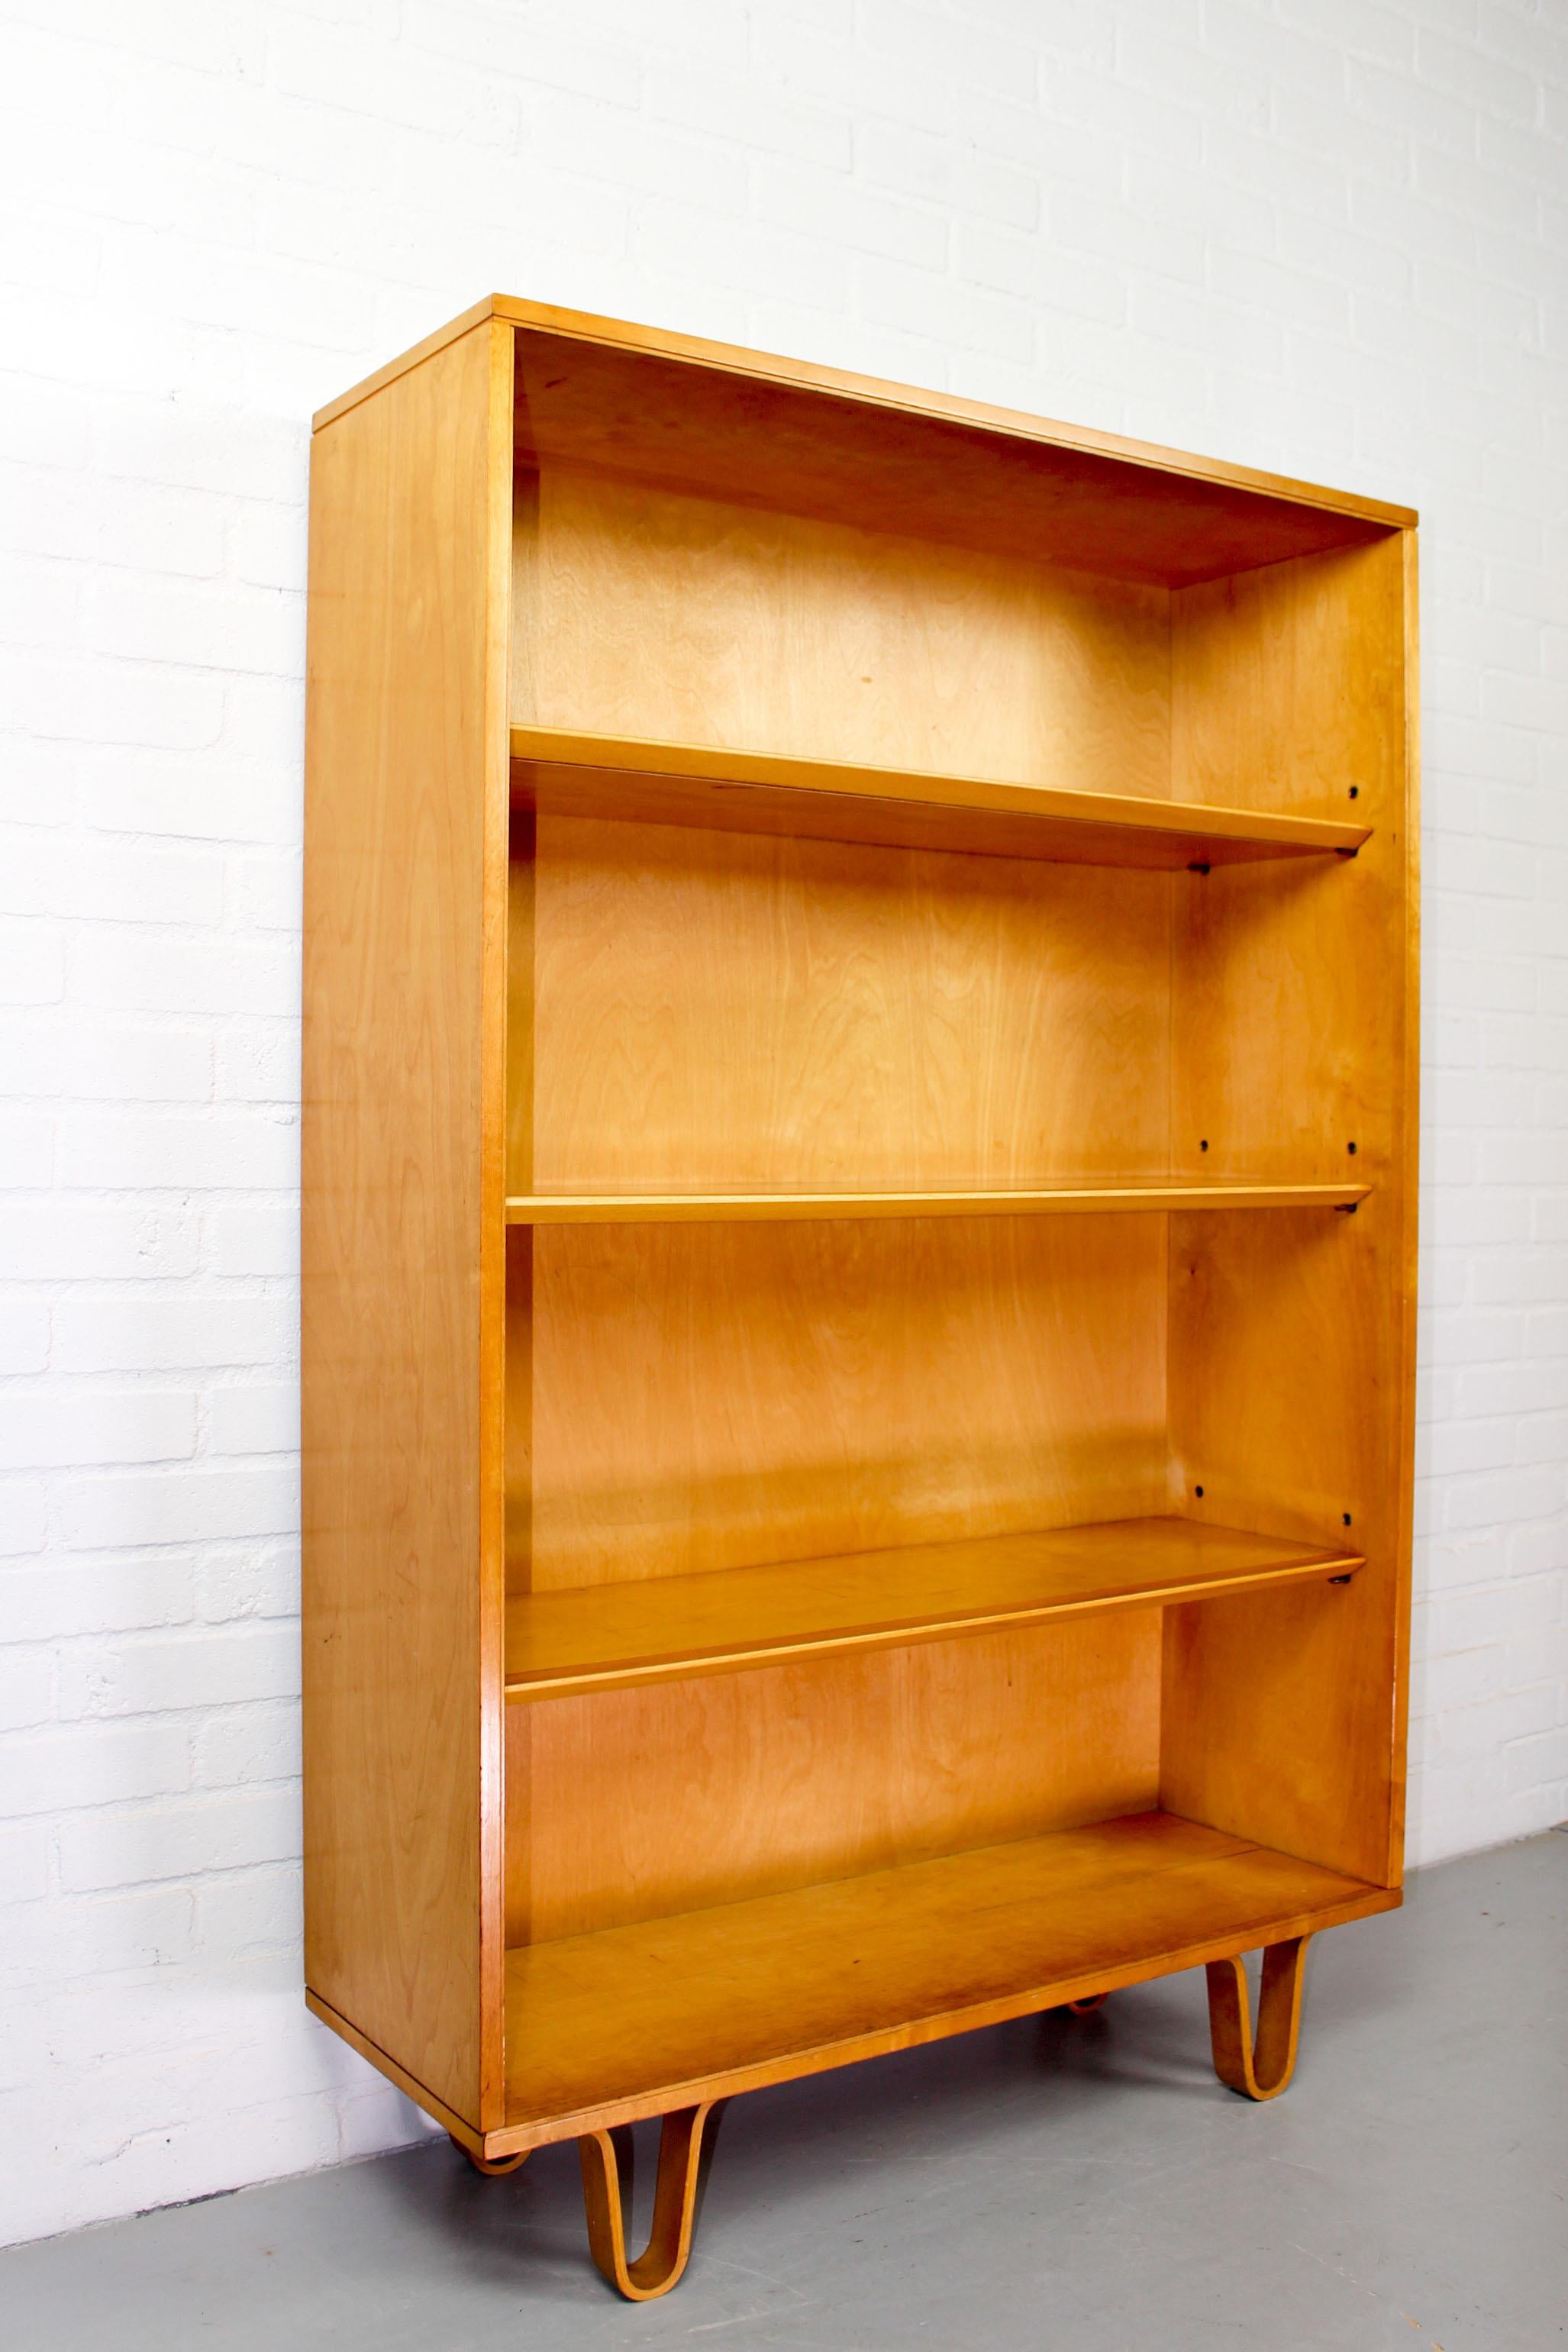 Birch series bookcase by Cees Braakman for Pastoe. The Birch series are famous for their bended legs. A design from the 1950s and very collectible these days. This bookcase is in a good condition with some usermarks from age and use. It is marked by